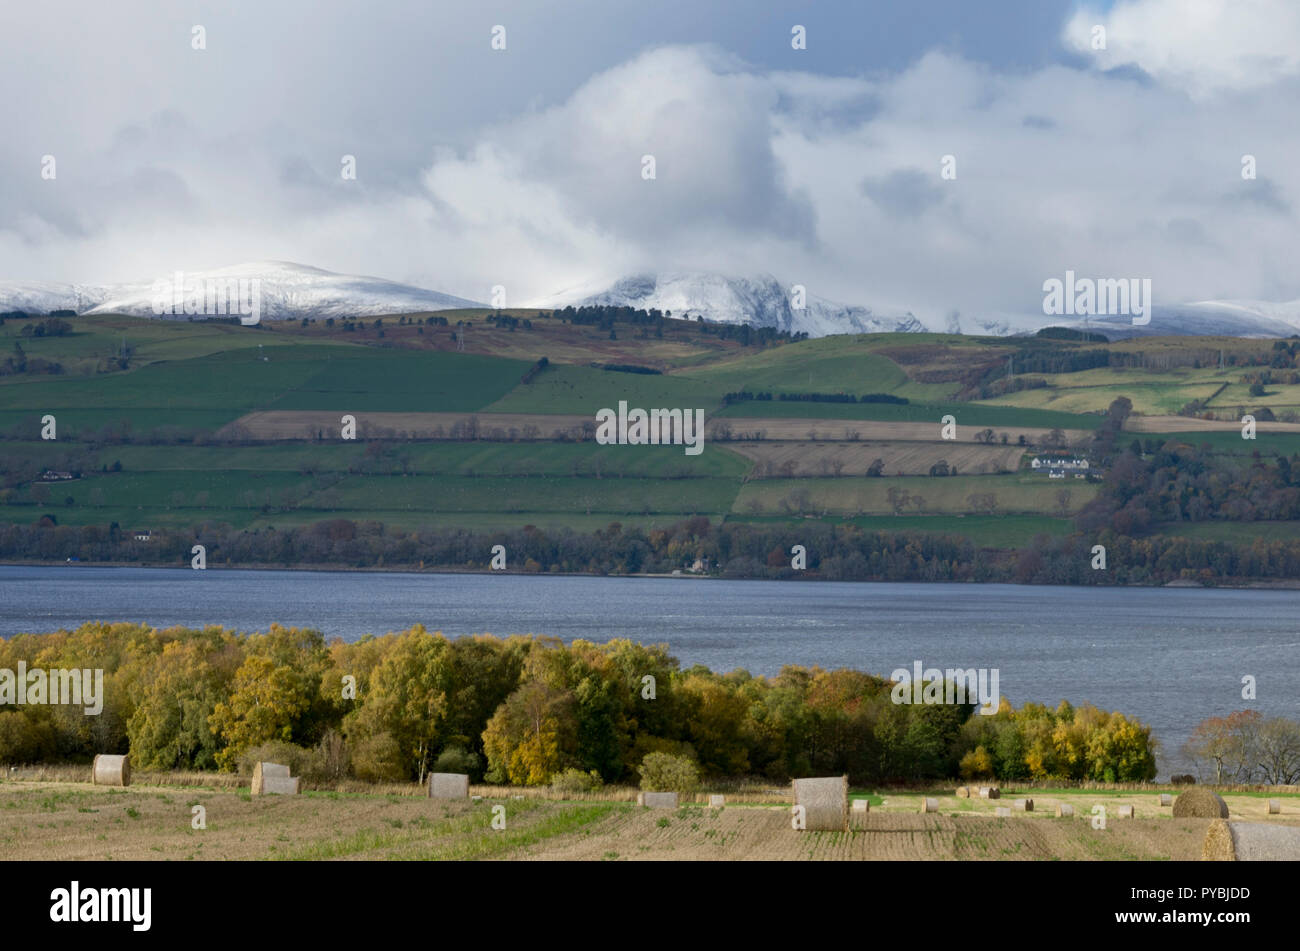 Cromarty Firth, Scotland. 26th Oct 2018. UK Weather: First snow from this weekend's  yellow 'severe' weather warning. And passing shower over Cromarty bridge with rainbow  Cromarty Firth, Scotland Credit: Chris Jones/Alamy Live News Stock Photo